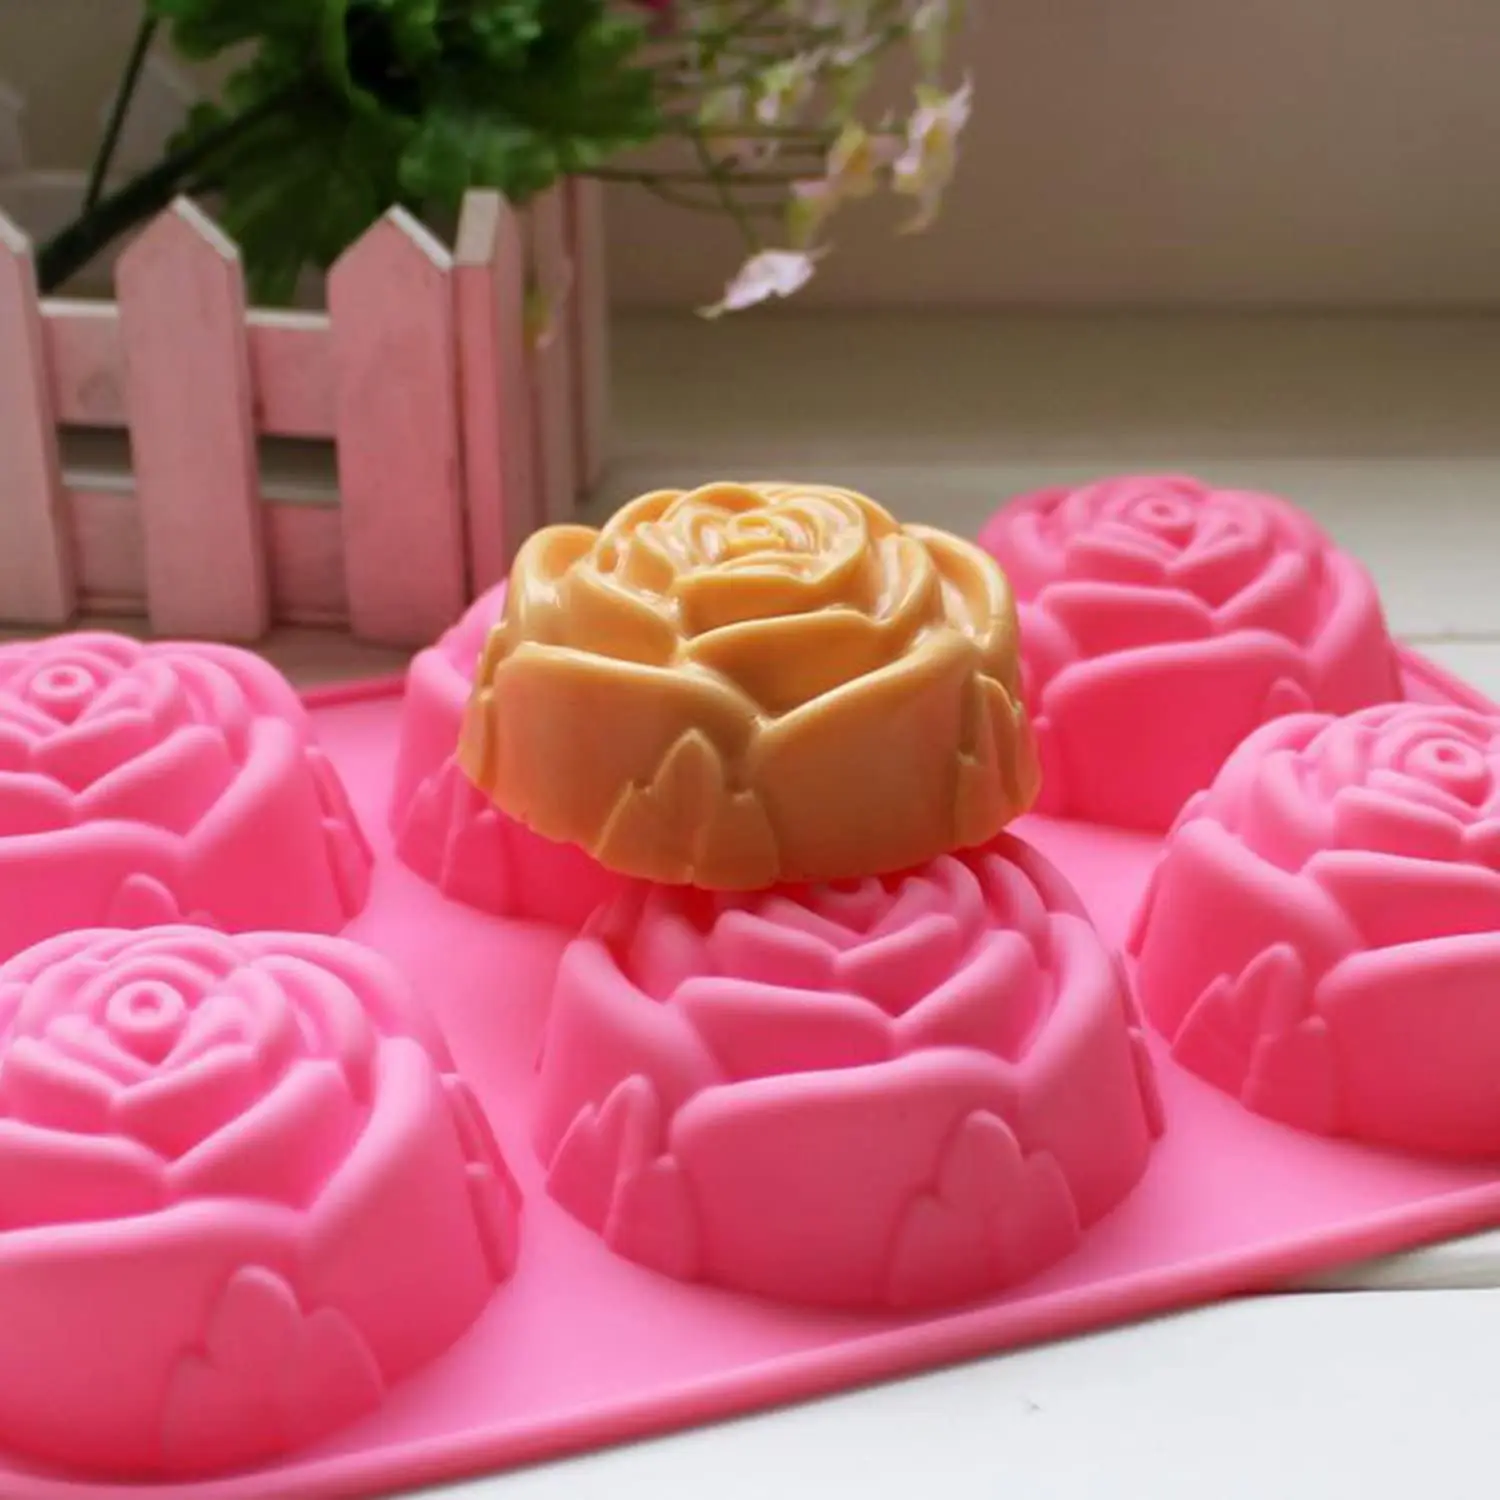 

DUMP 6 Cavity Pink Rose Cake Mold Silicone Mold For Cake Jelly Pudding Chocolate Muffin Tray Non Stick Baking Pan Tool